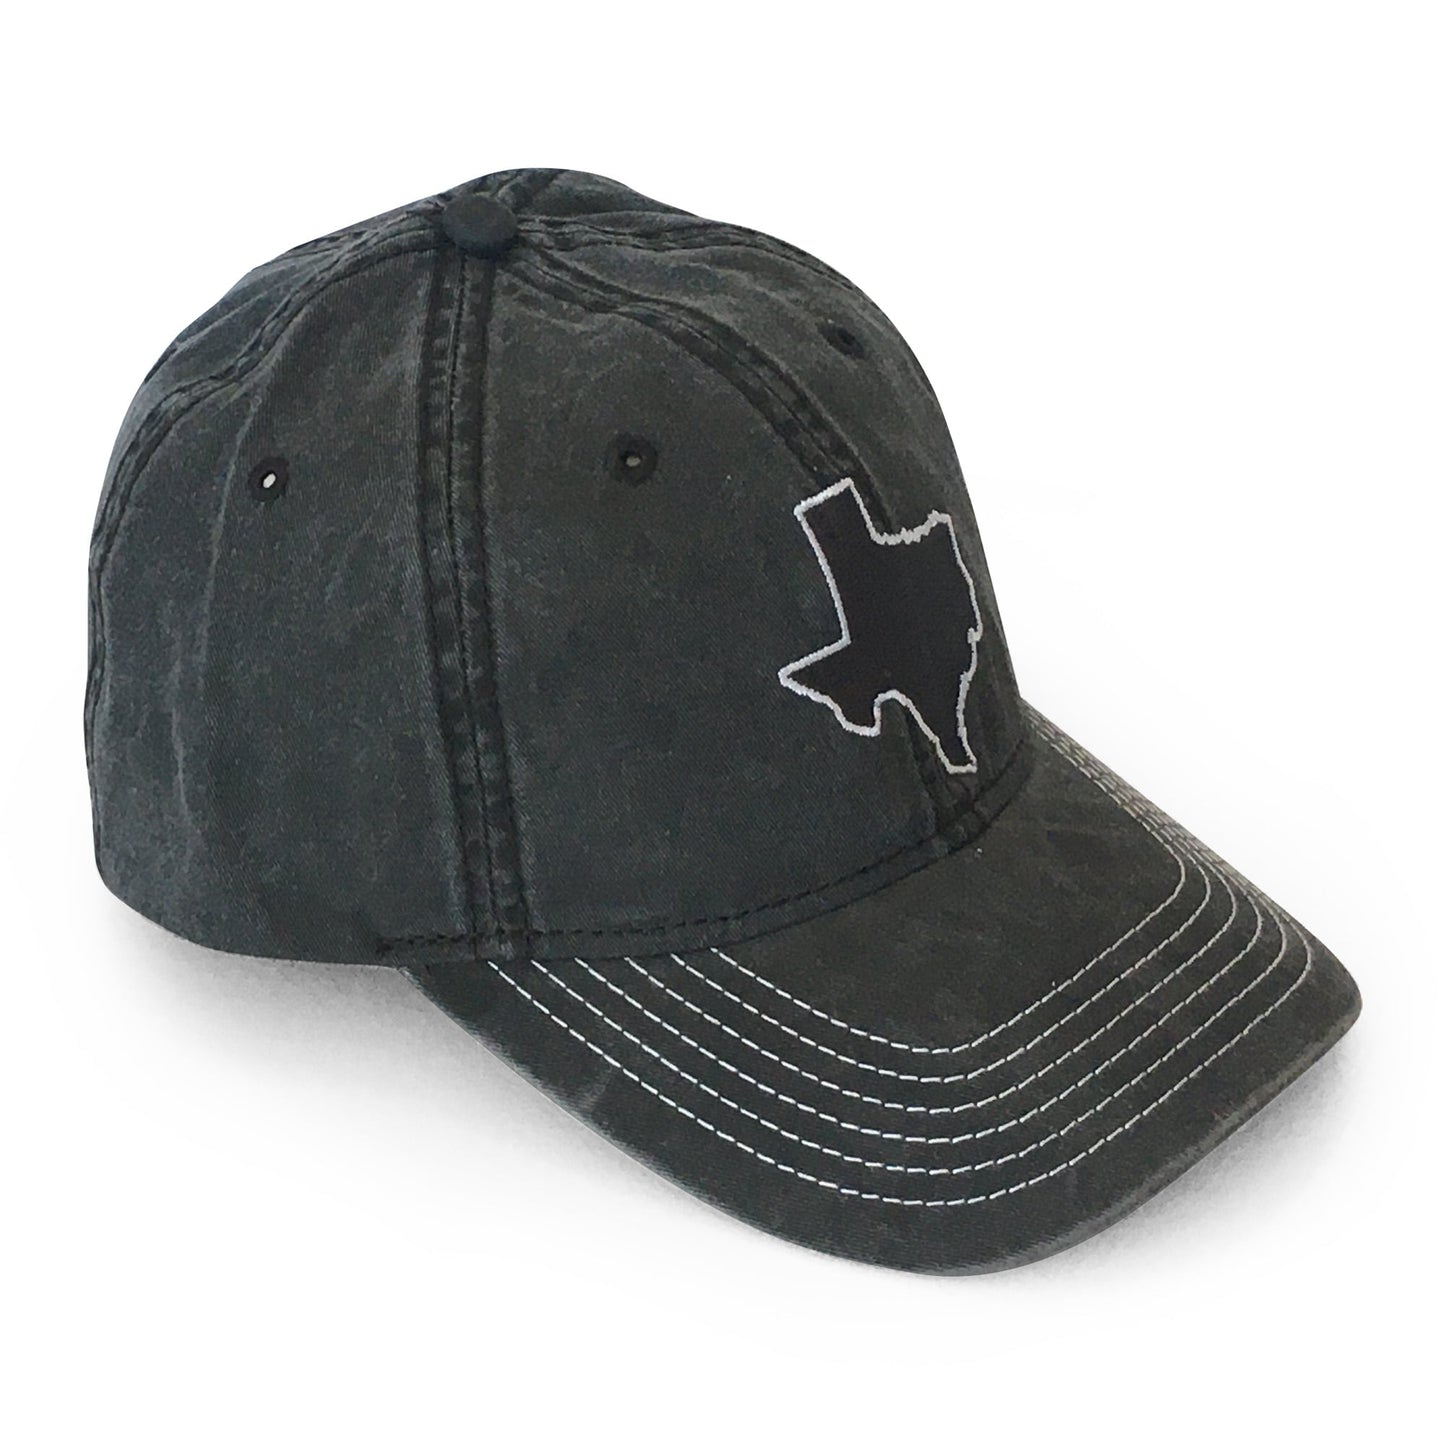 Texas Embroidered Hat | Grunt Style 